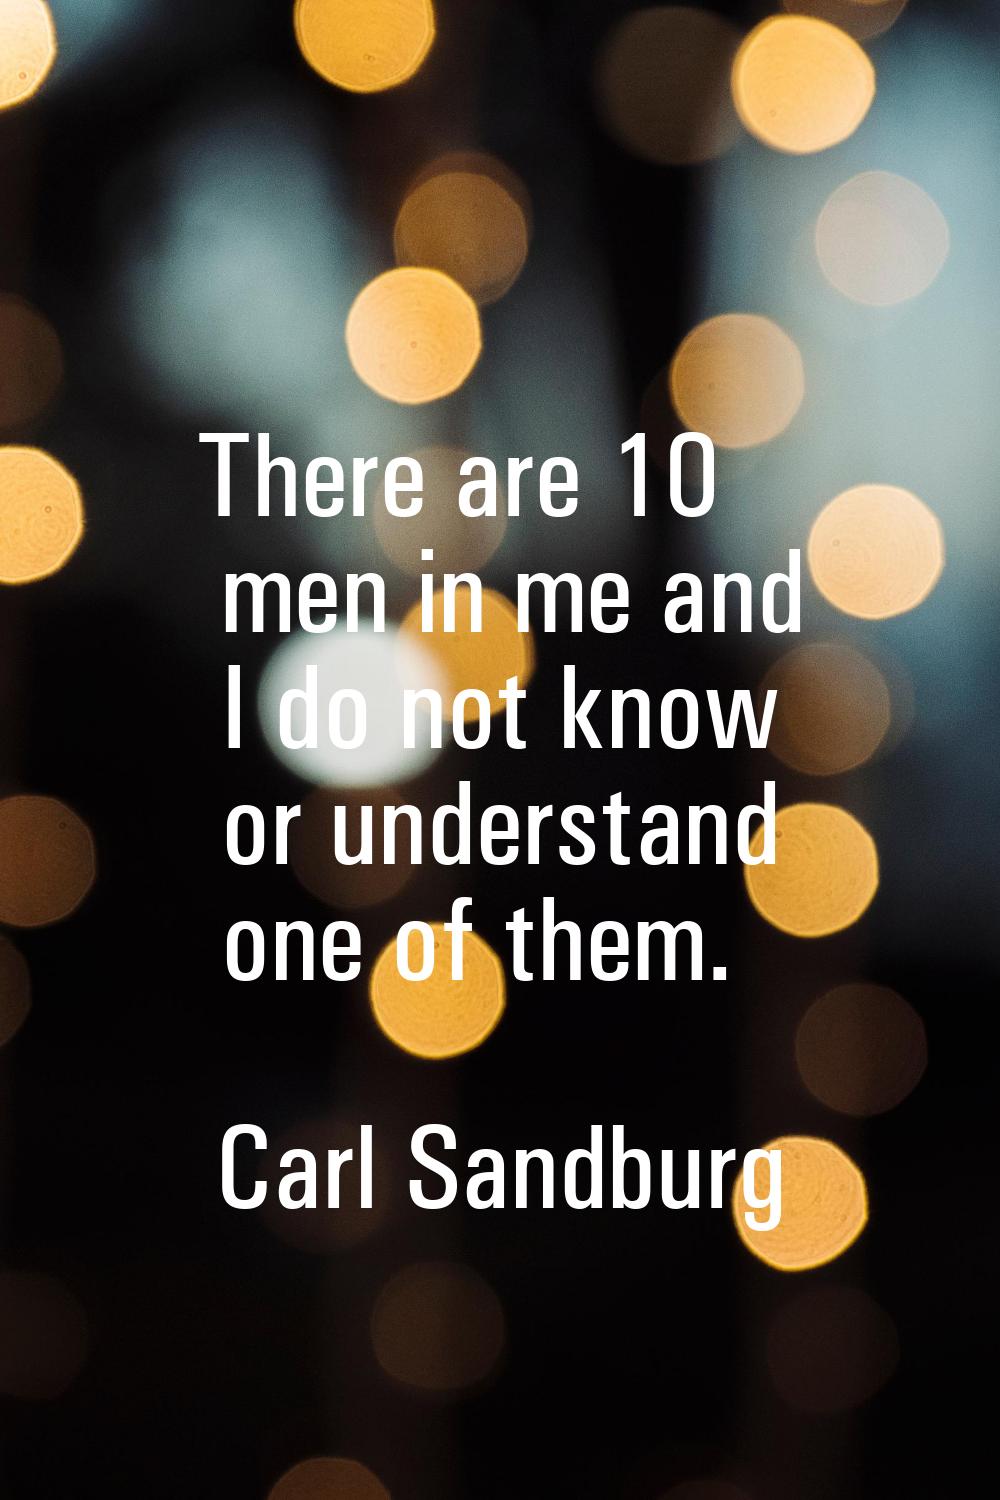 There are 10 men in me and I do not know or understand one of them.